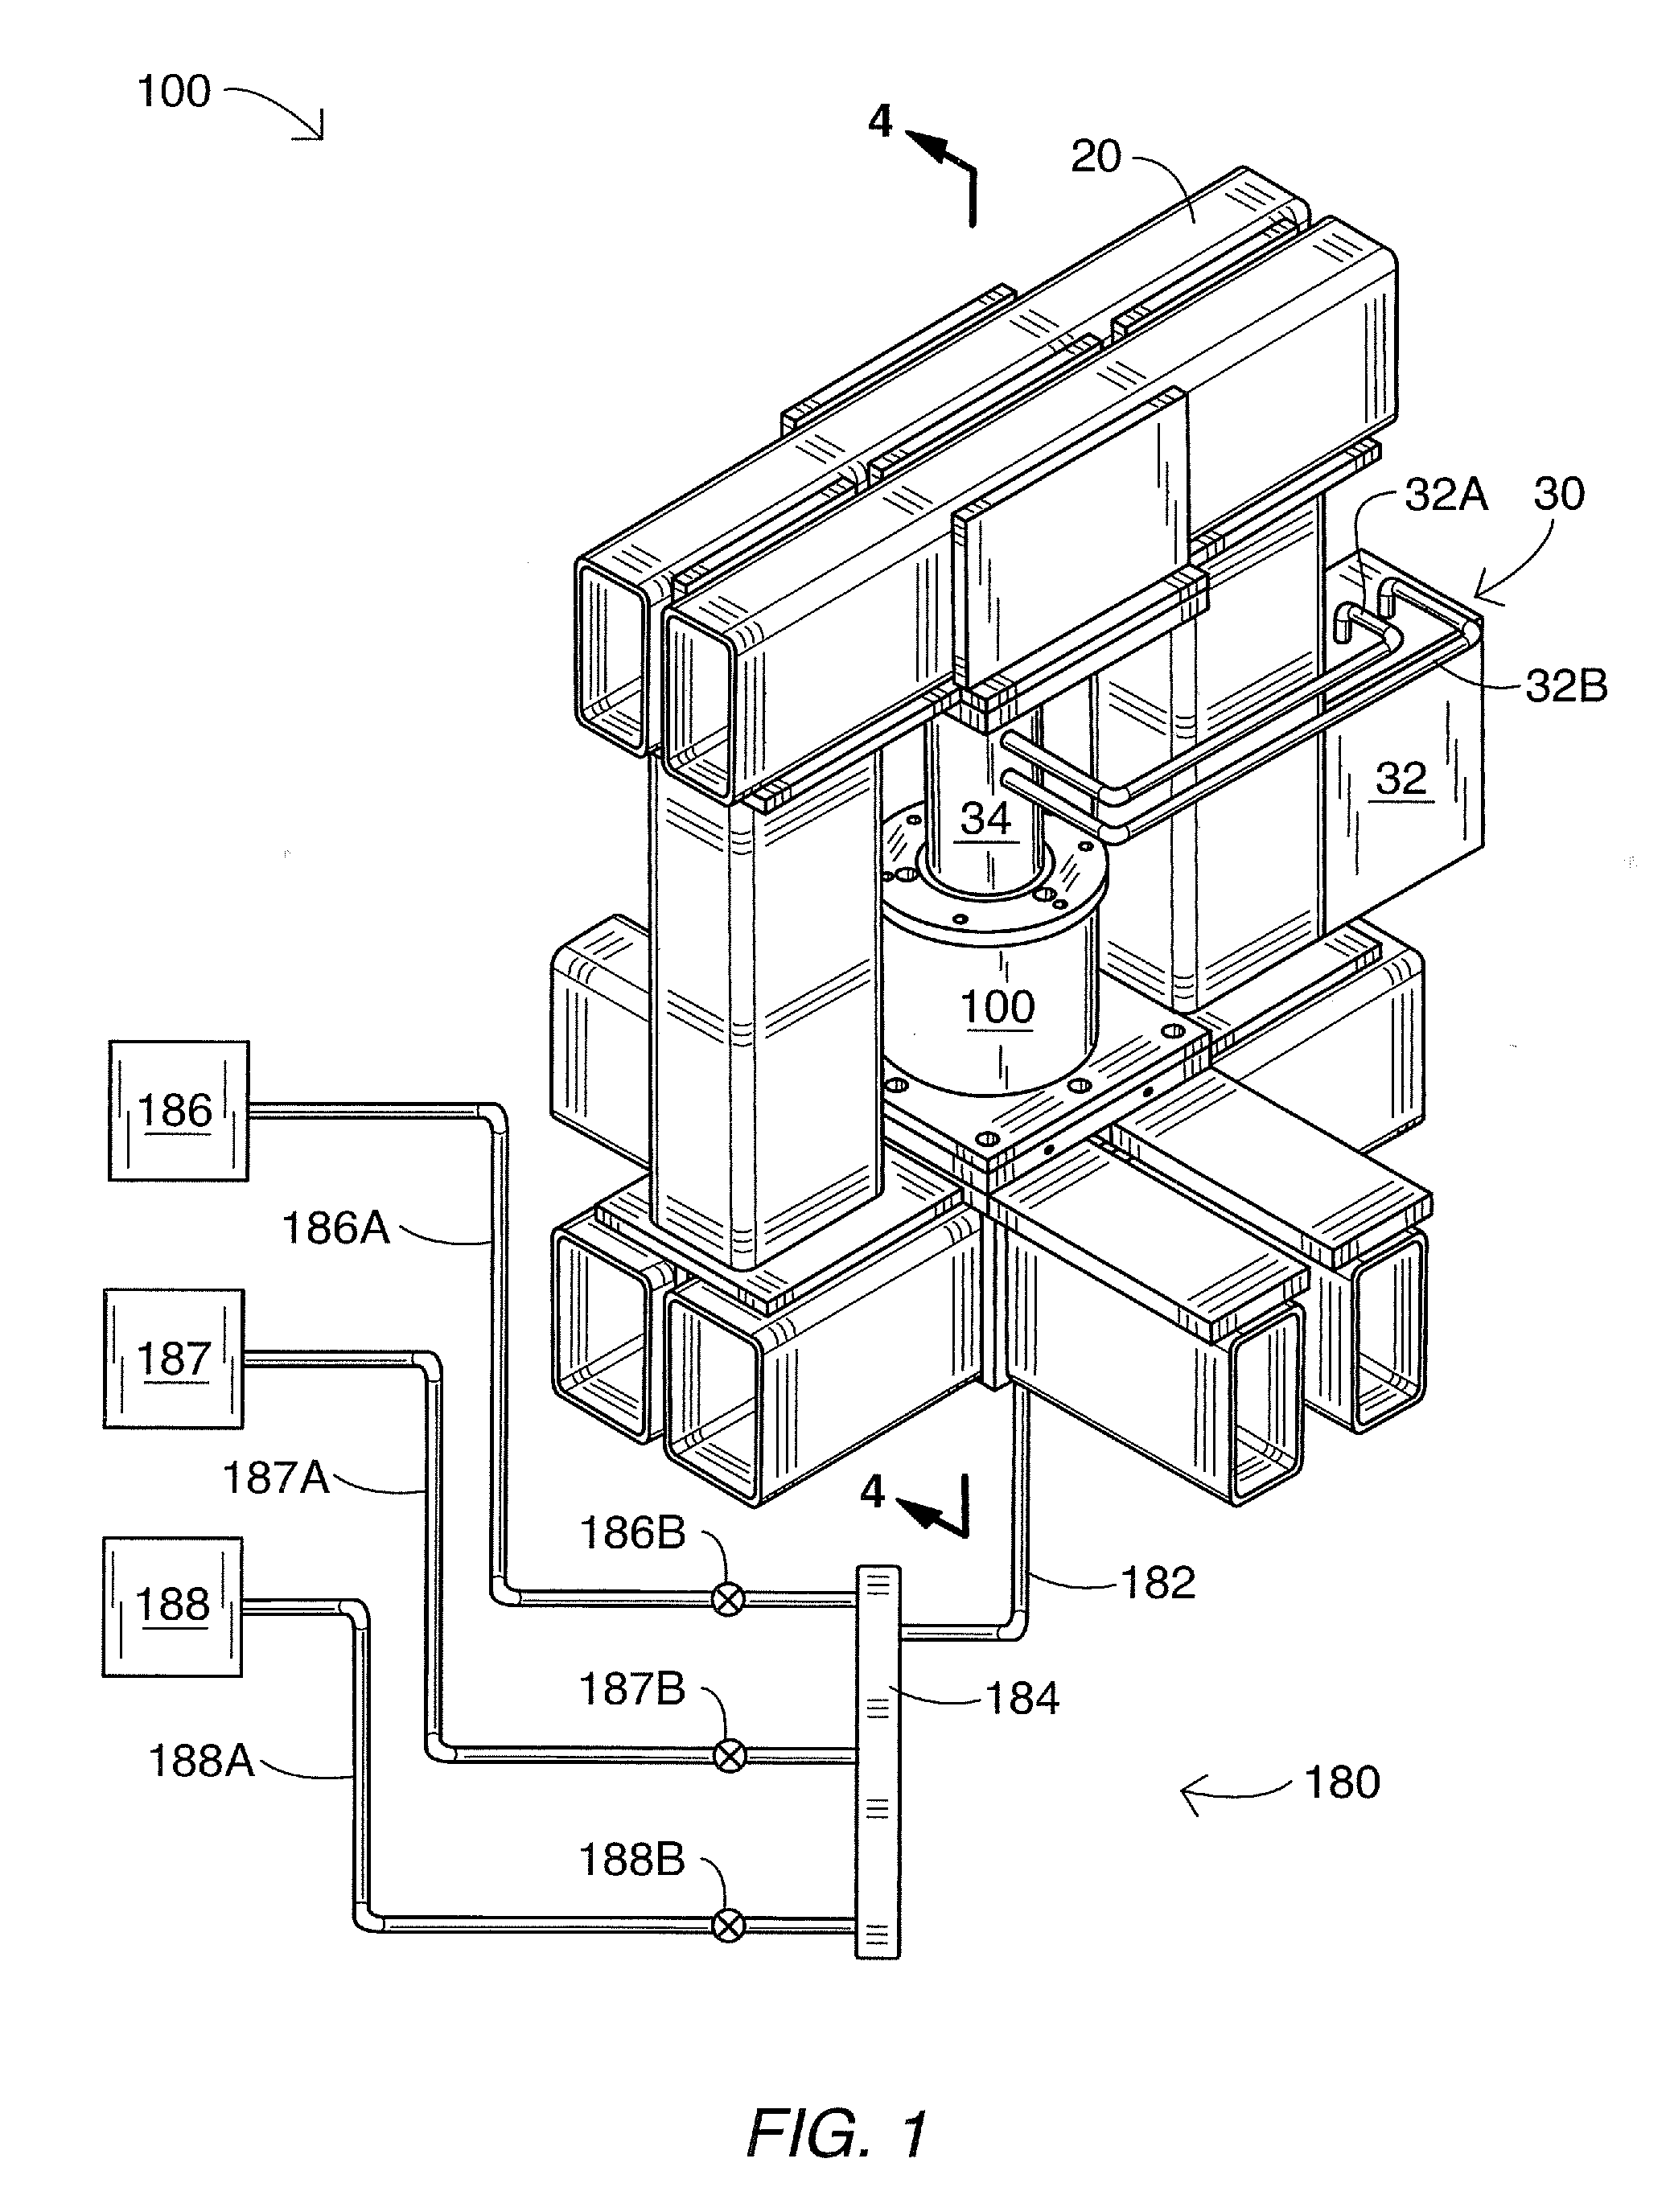 Compactor Systems and Methods for Compacting a Mass